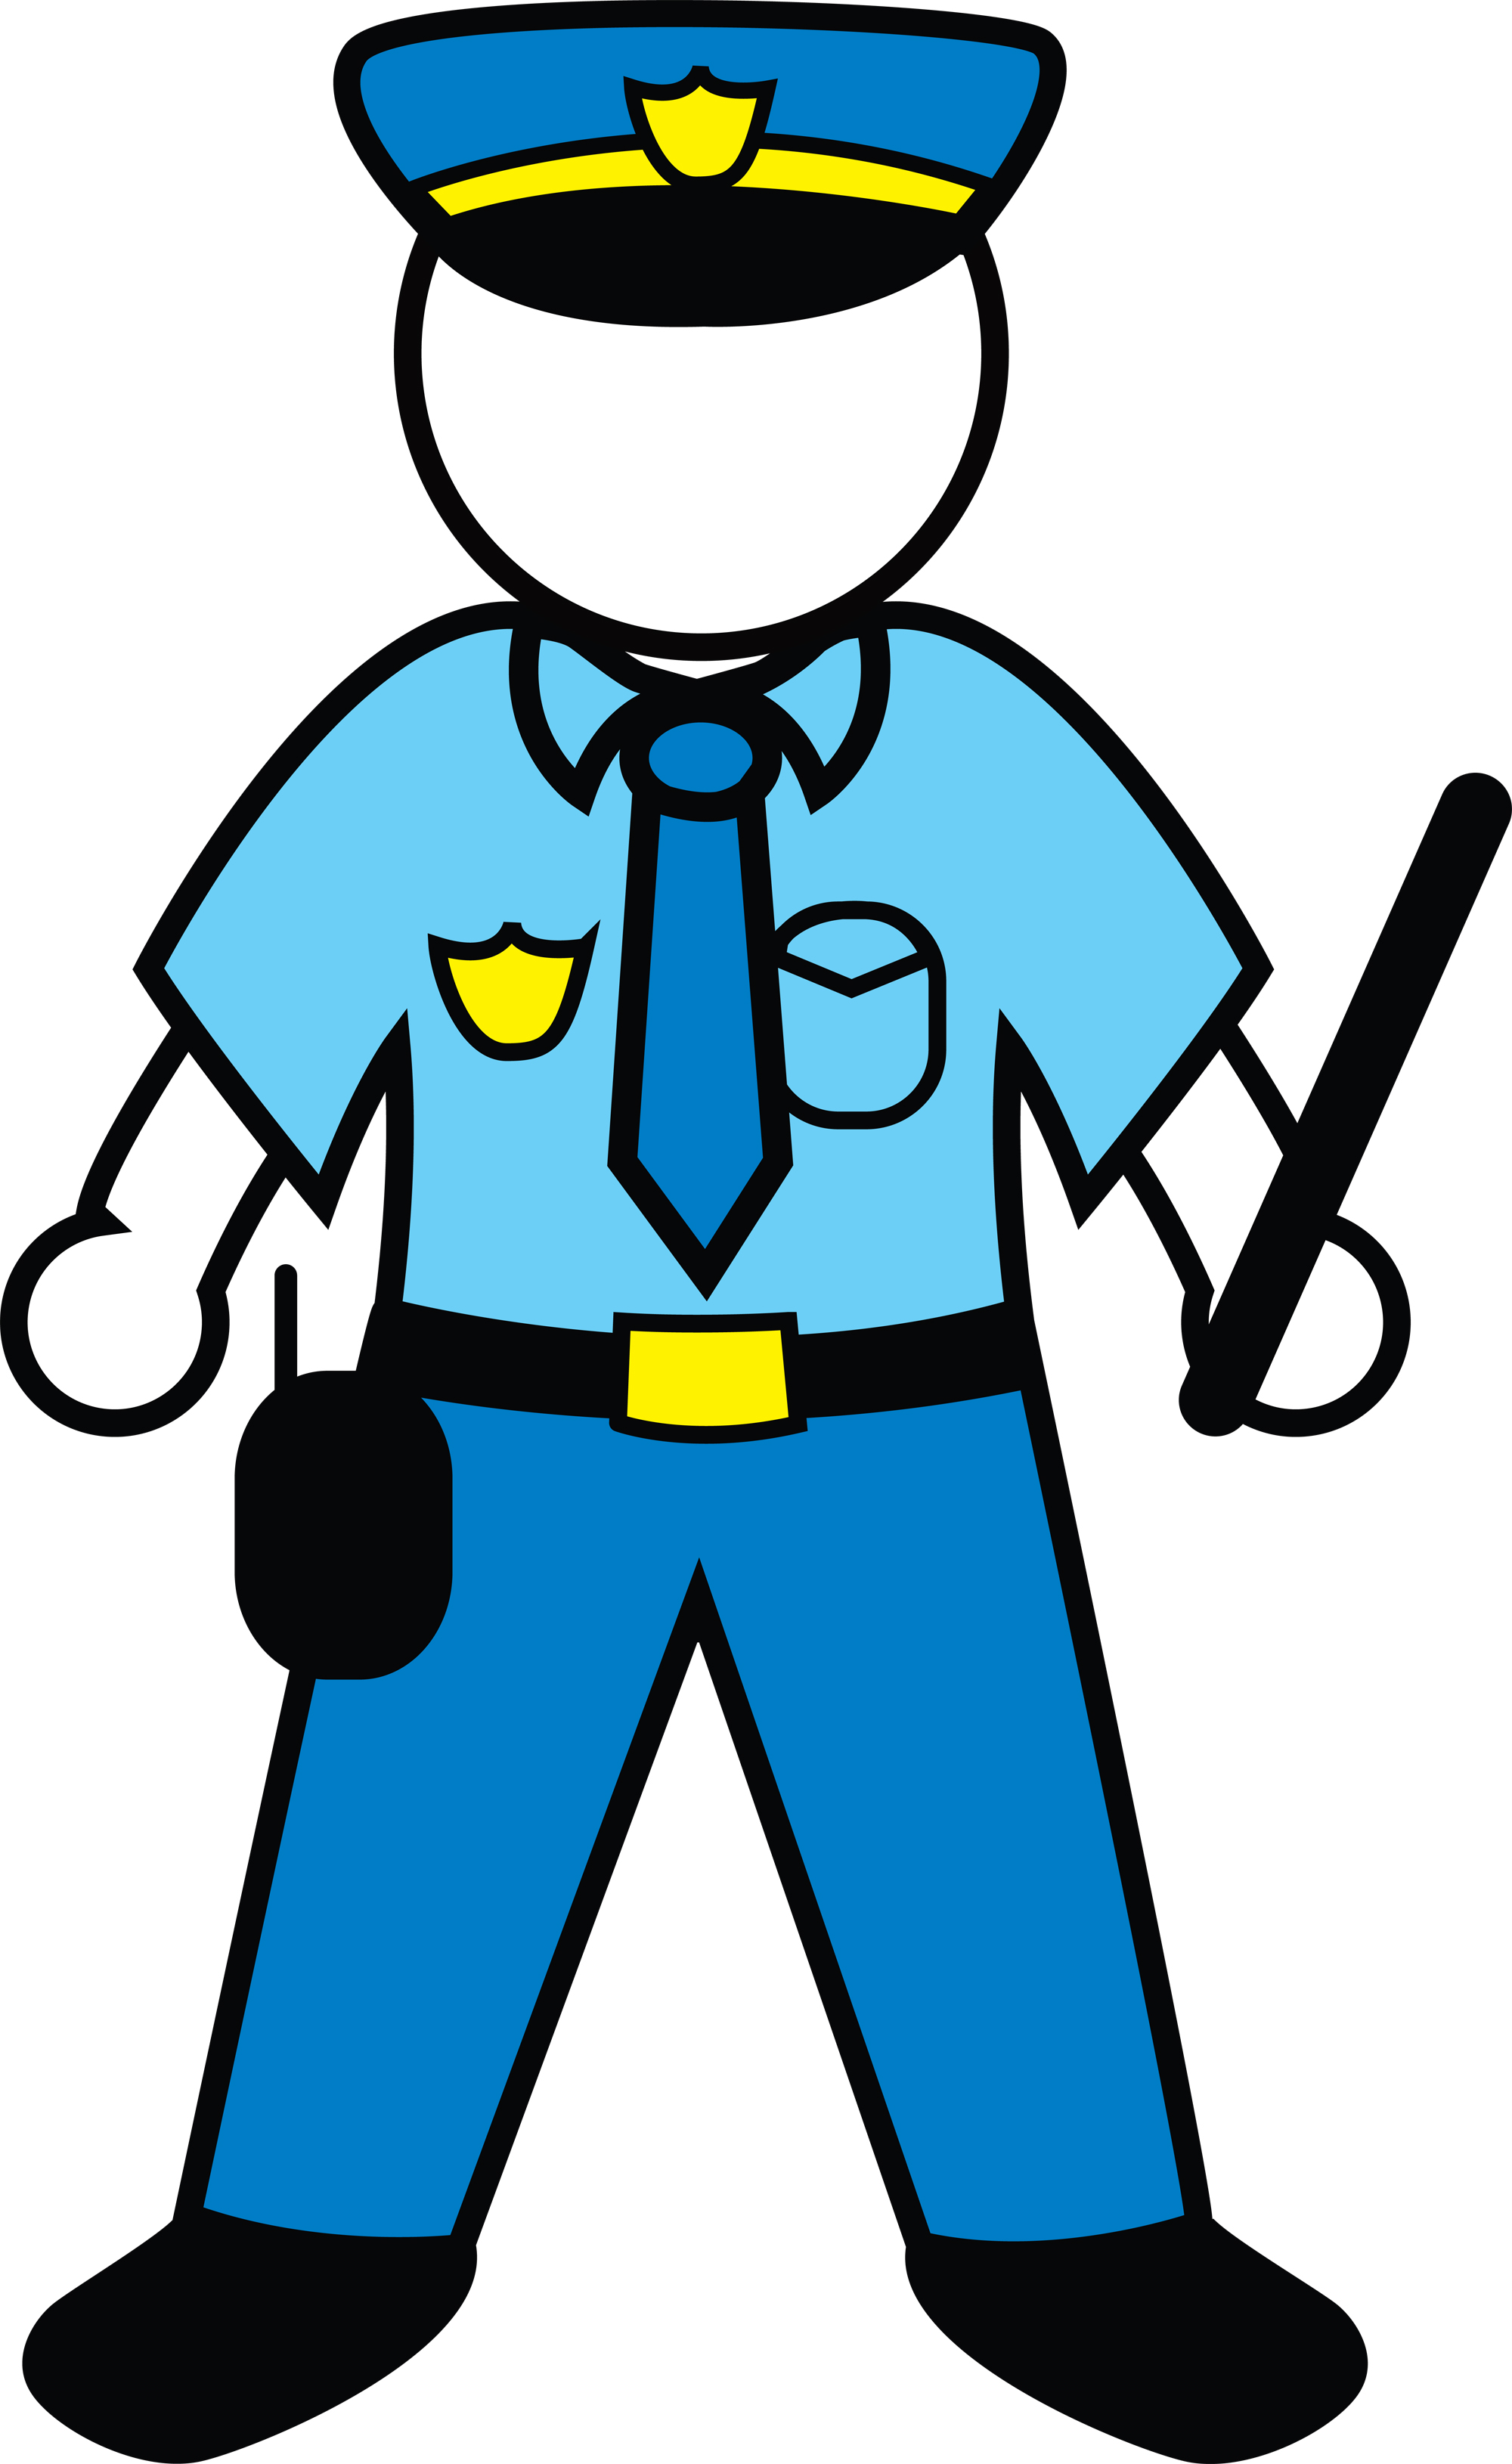 How To Draw A Policeman | Free Download Clip Art | Free Clip Art ...